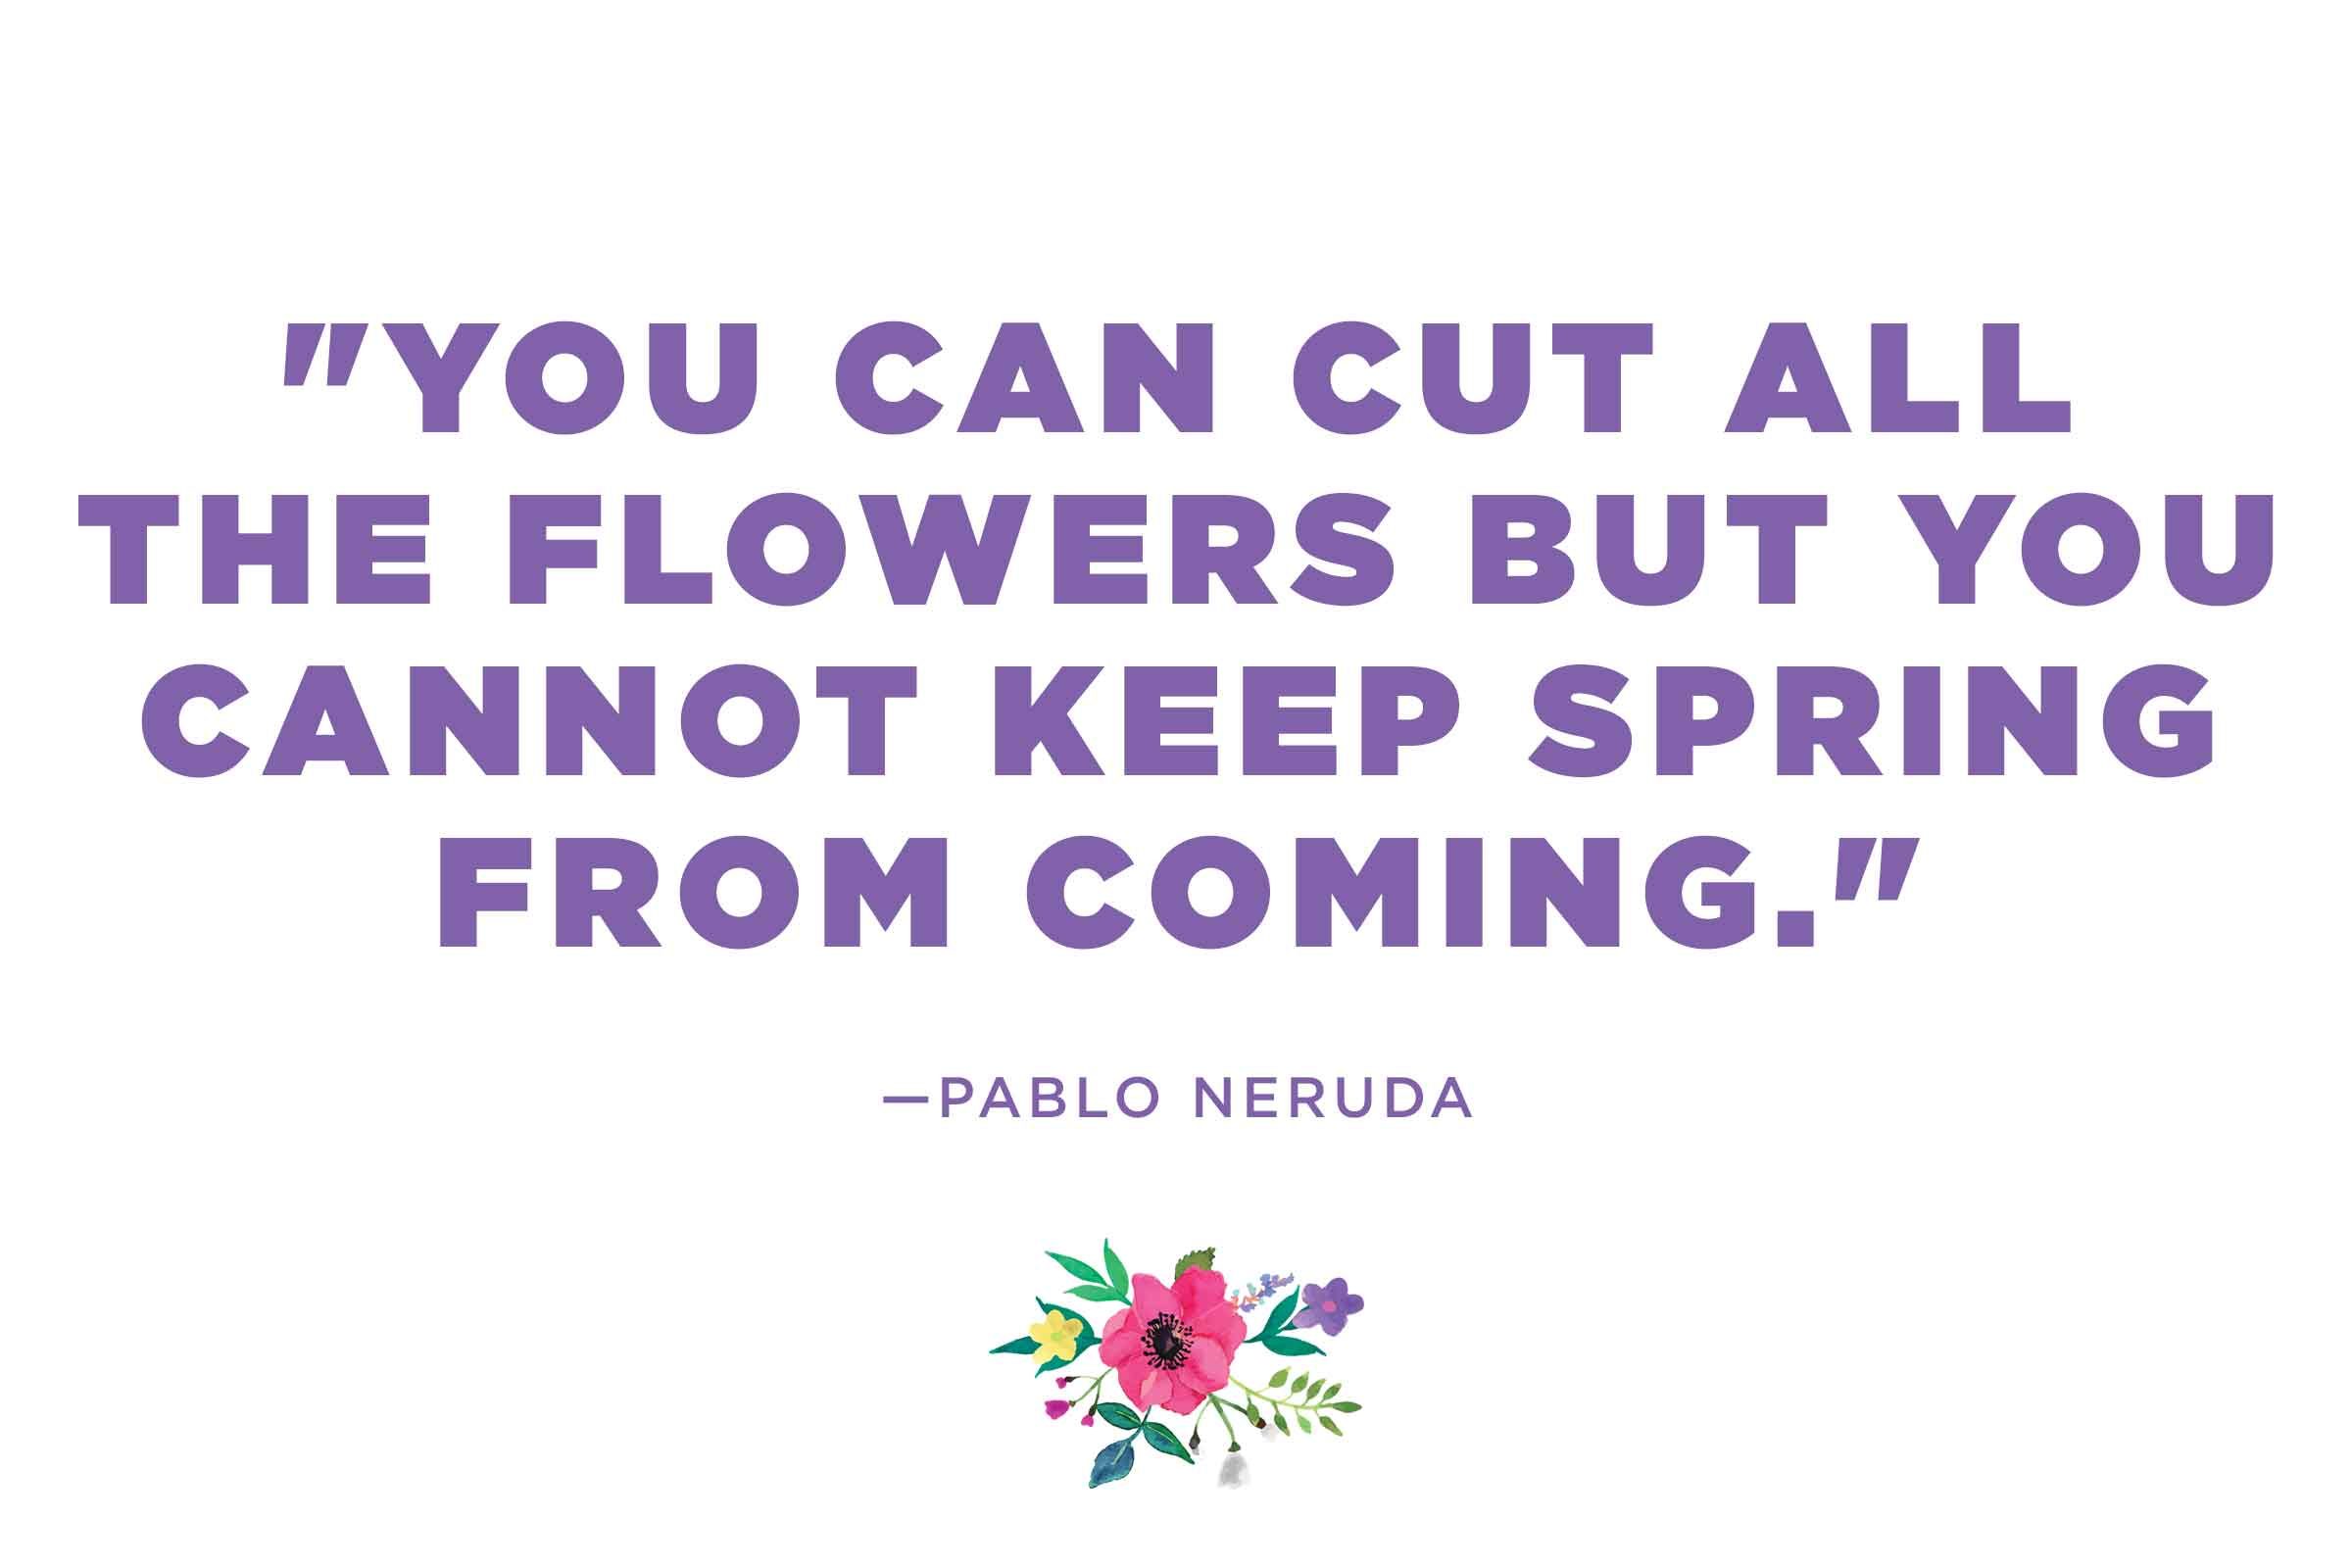 Pablo Neruda on the limits of flowers